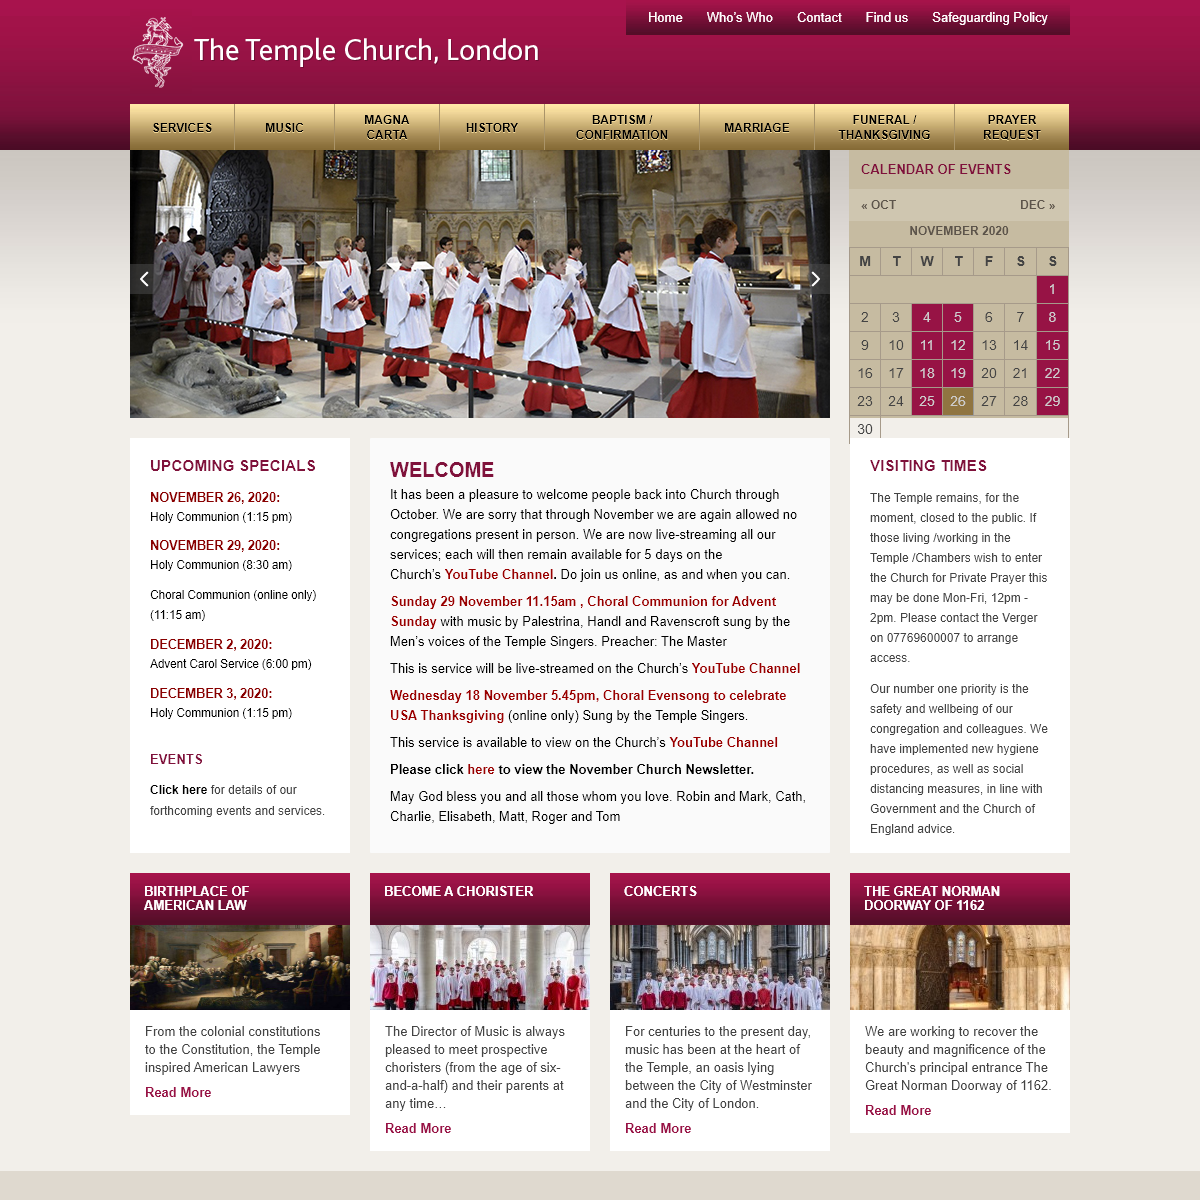 A complete backup of templechurch.com